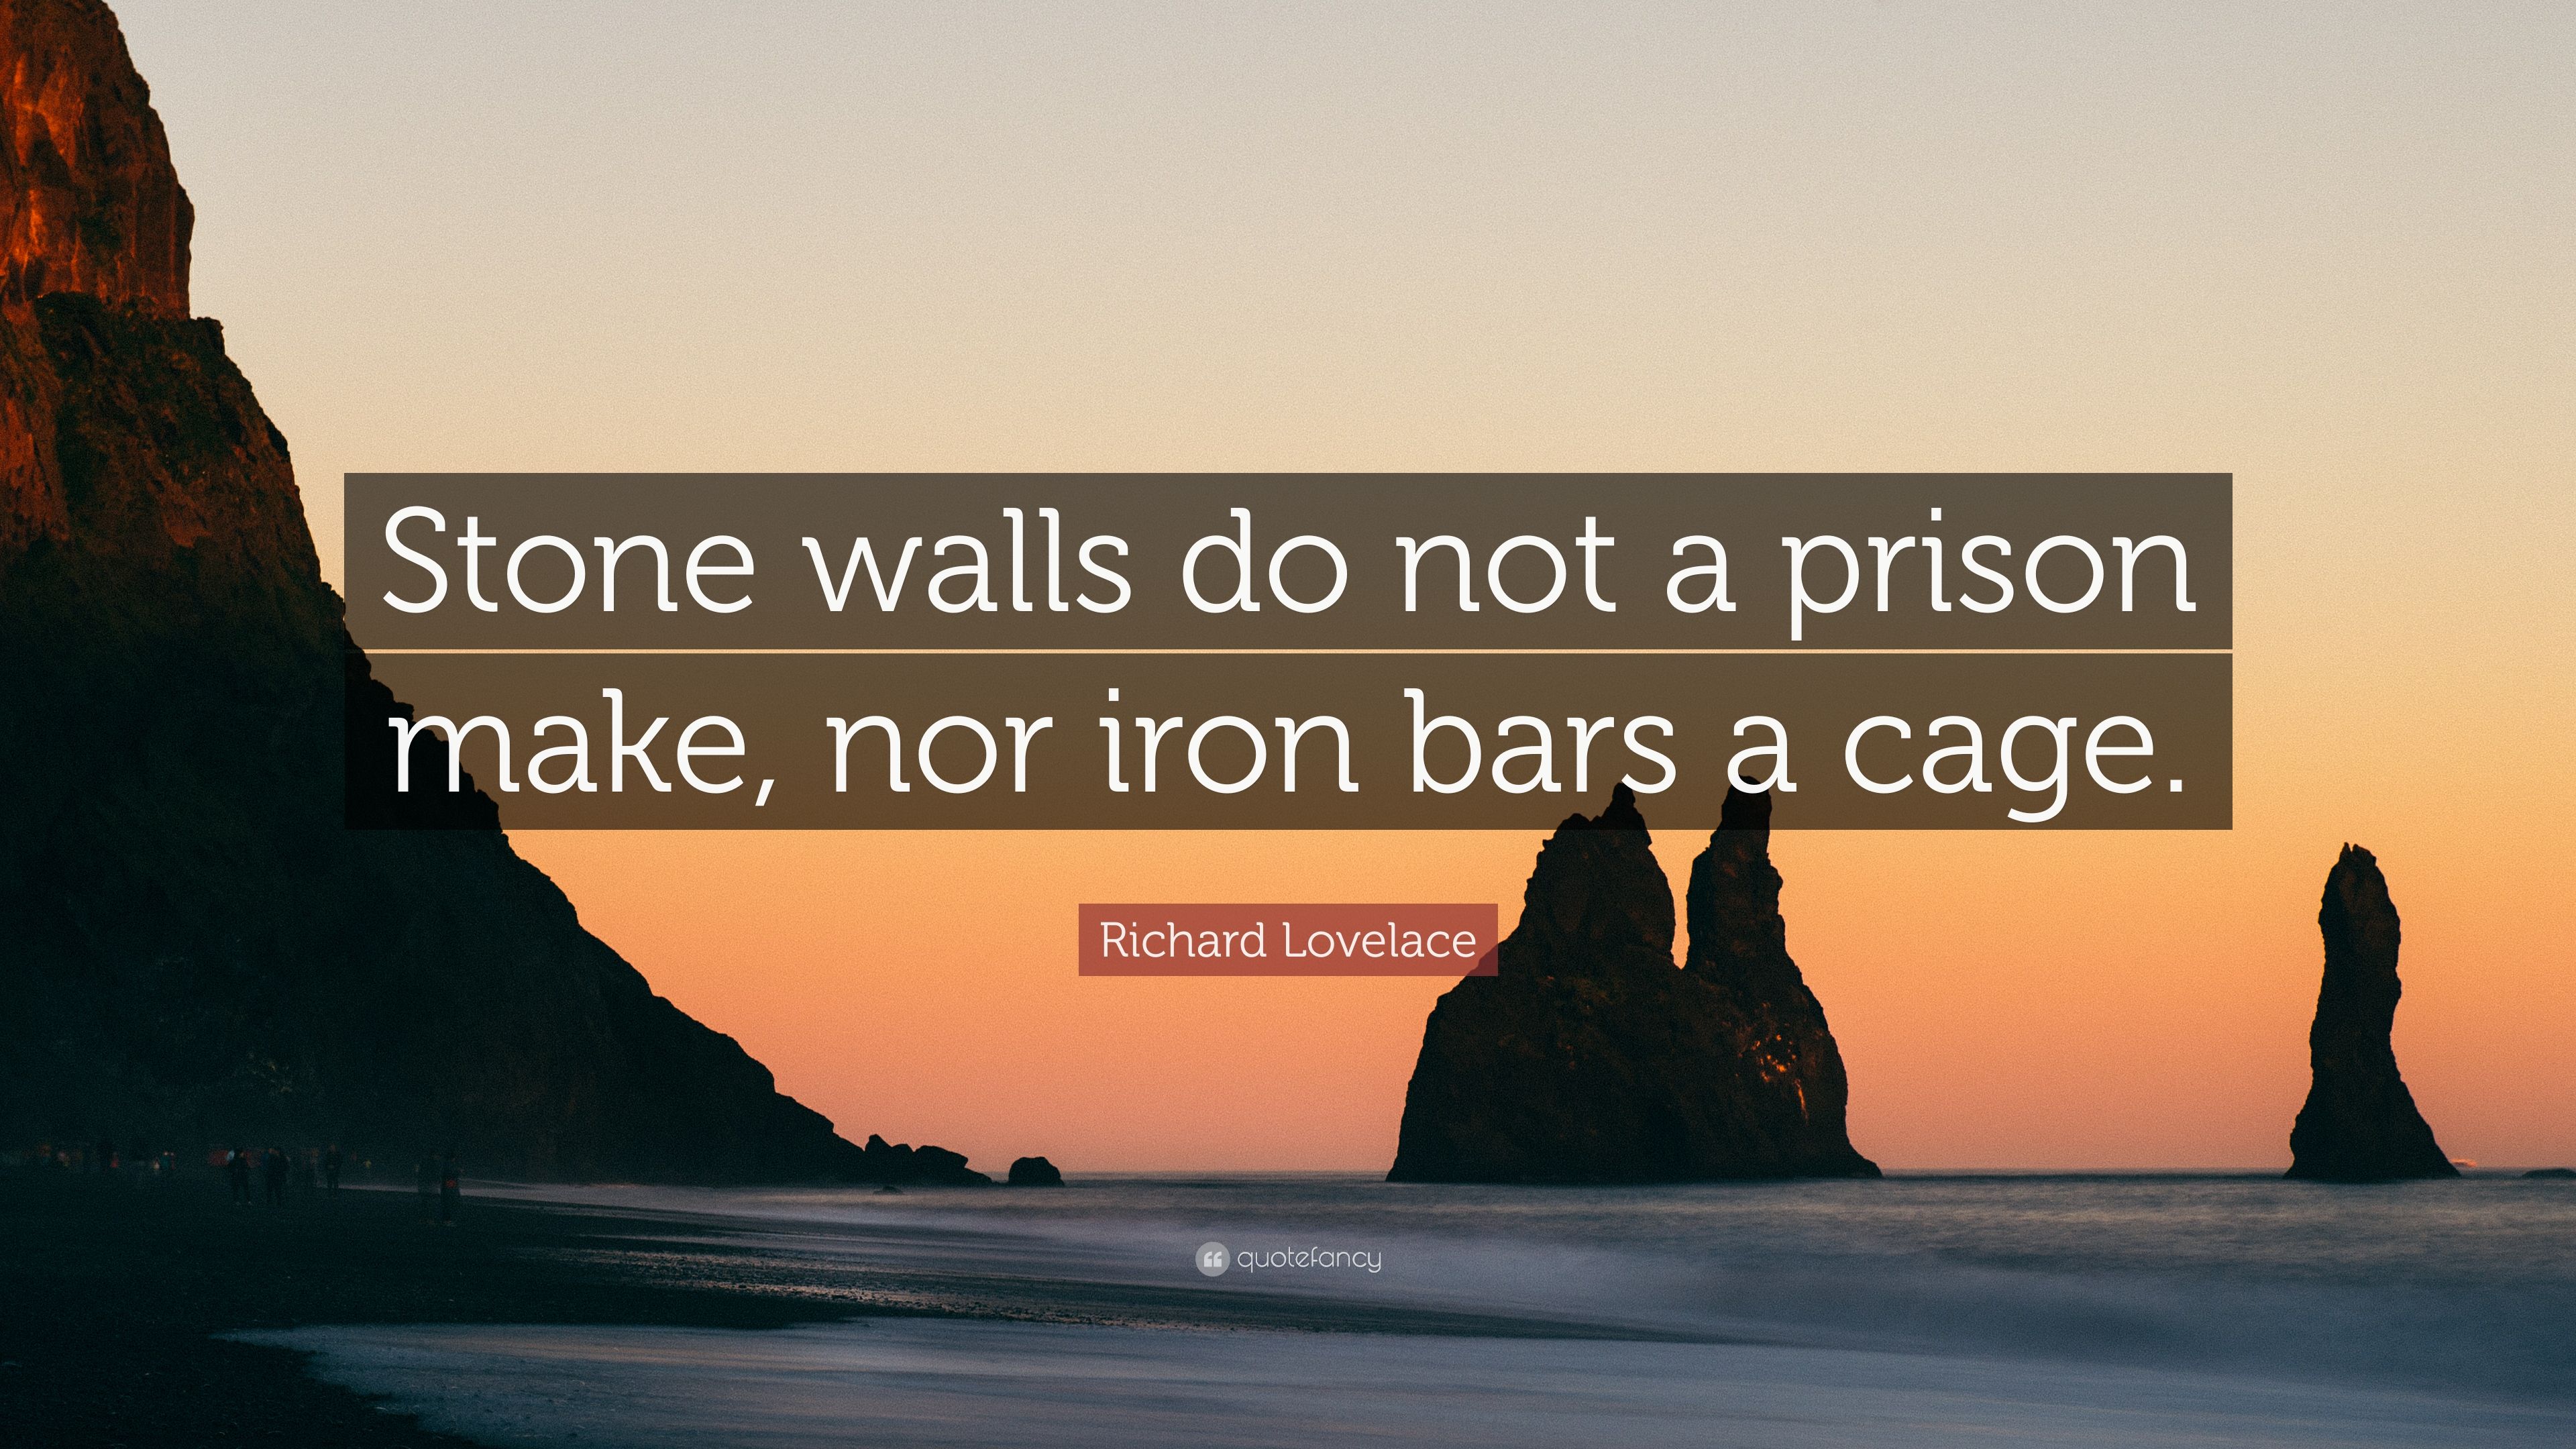 Richard lovelace quote âstone walls do not a prison make nor iron bars a cageâ